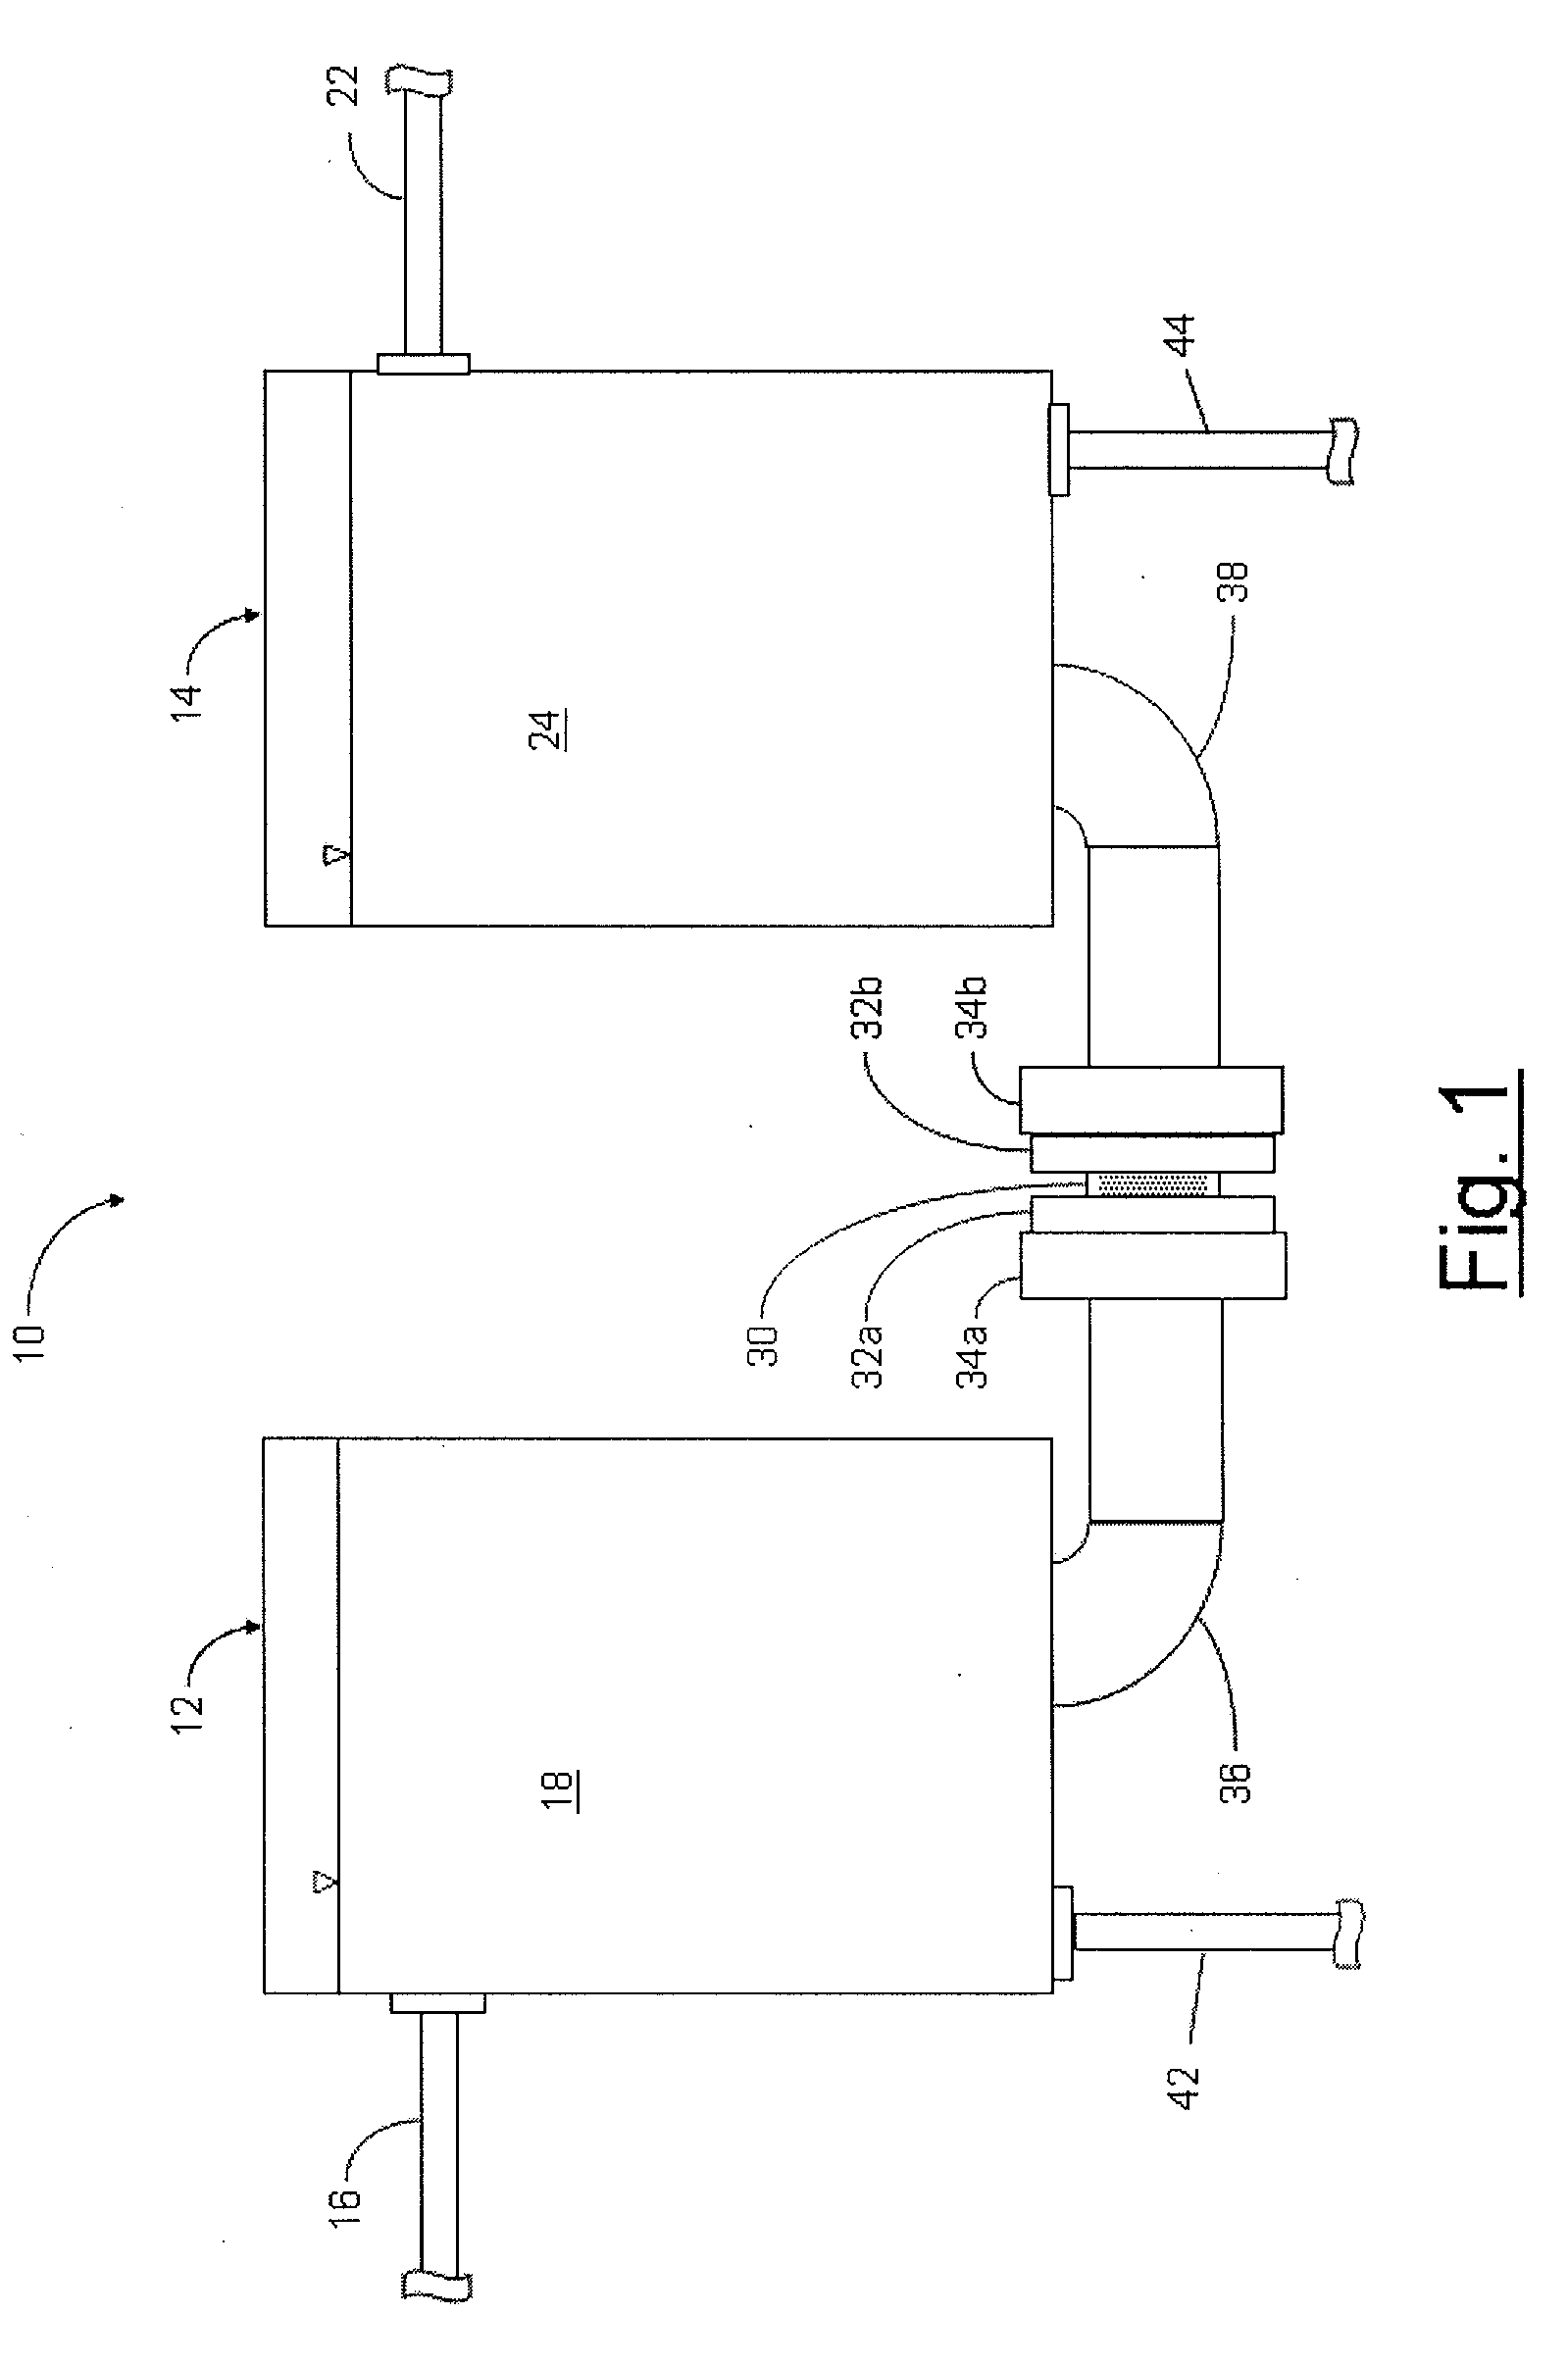 Systems and methods for forward osmosis fluid purification